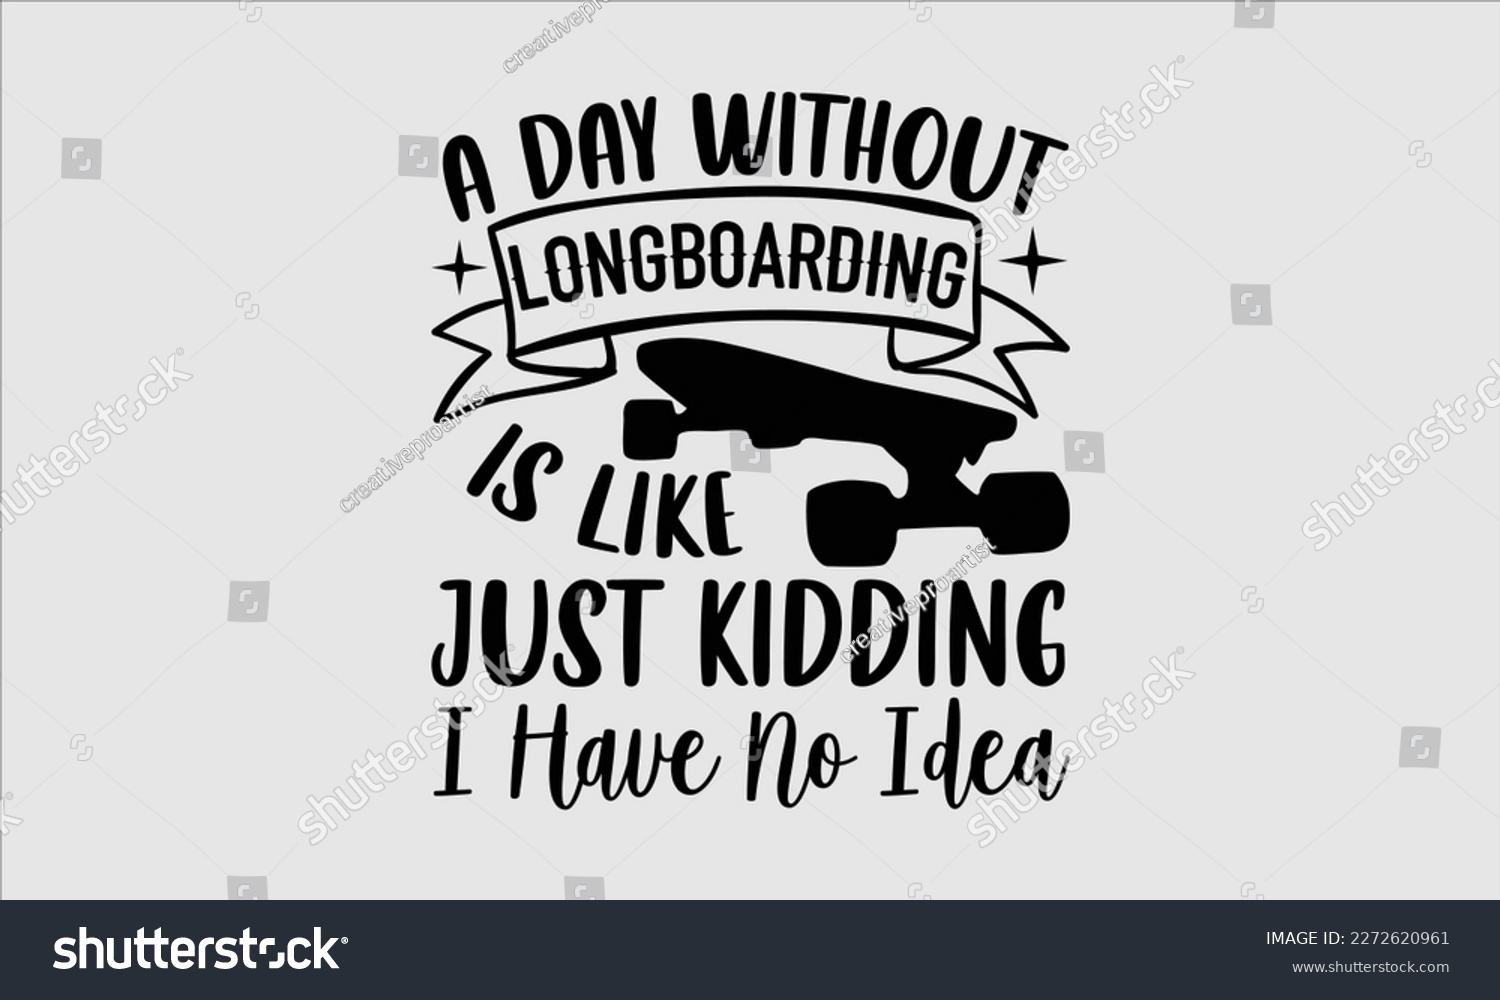 SVG of A day without longboarding is like just kidding I have no idea- Longboarding T- shirt Design, Hand drawn lettering phrase, Illustration for prints on t-shirts and bags, posters, funny eps files, svg c svg